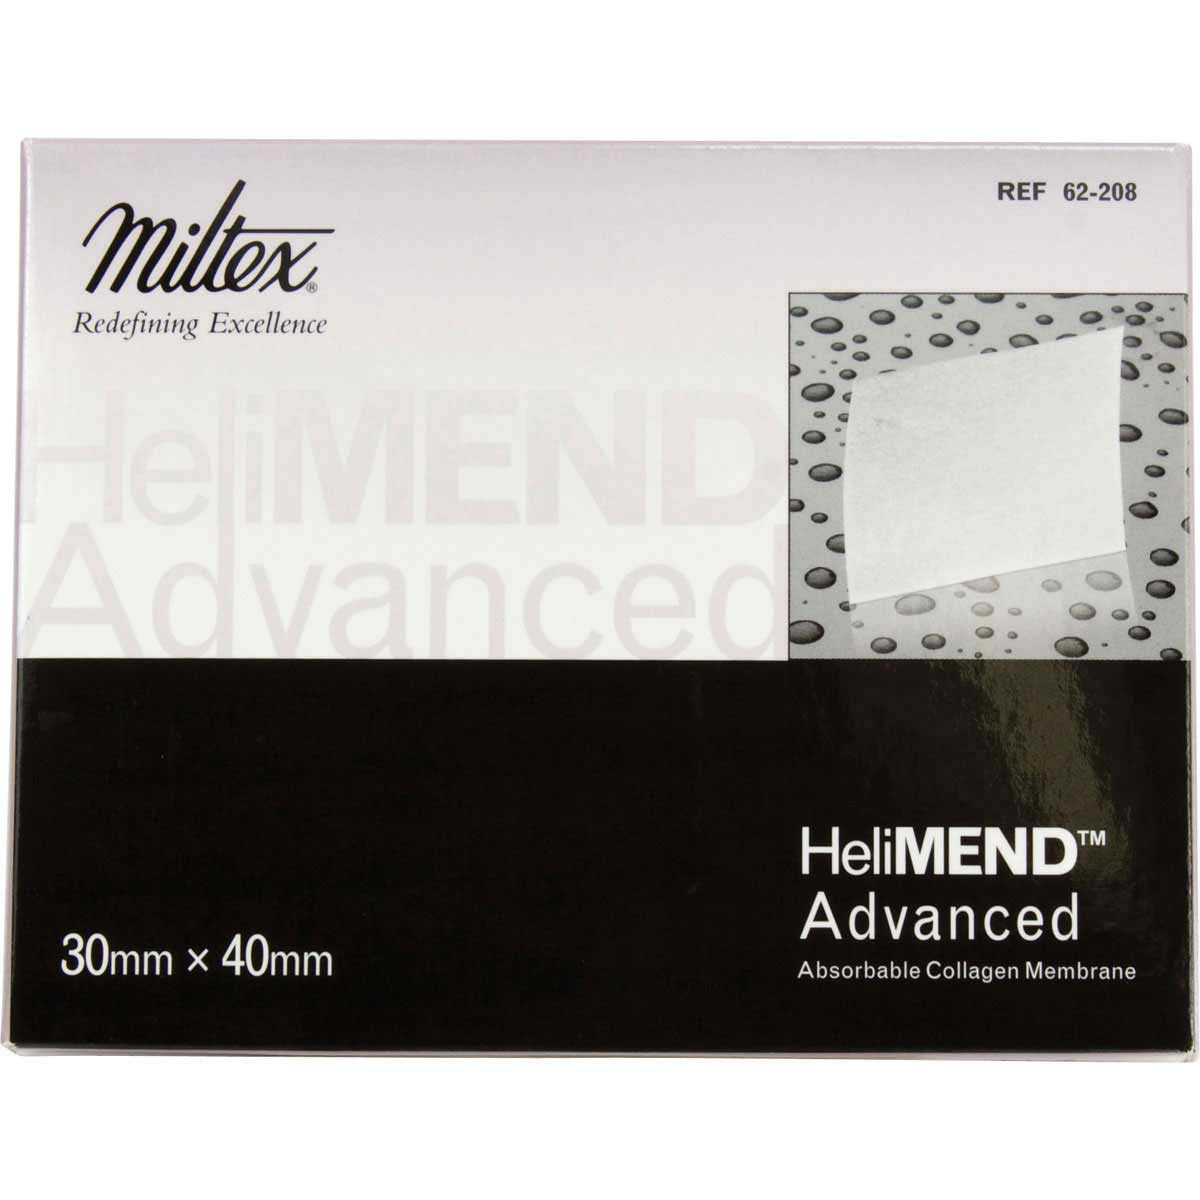 INTEGRA HeliMend Advanced Collagen Membrane for Dental Surgery, 30mm x  40mm. ID# 62-208